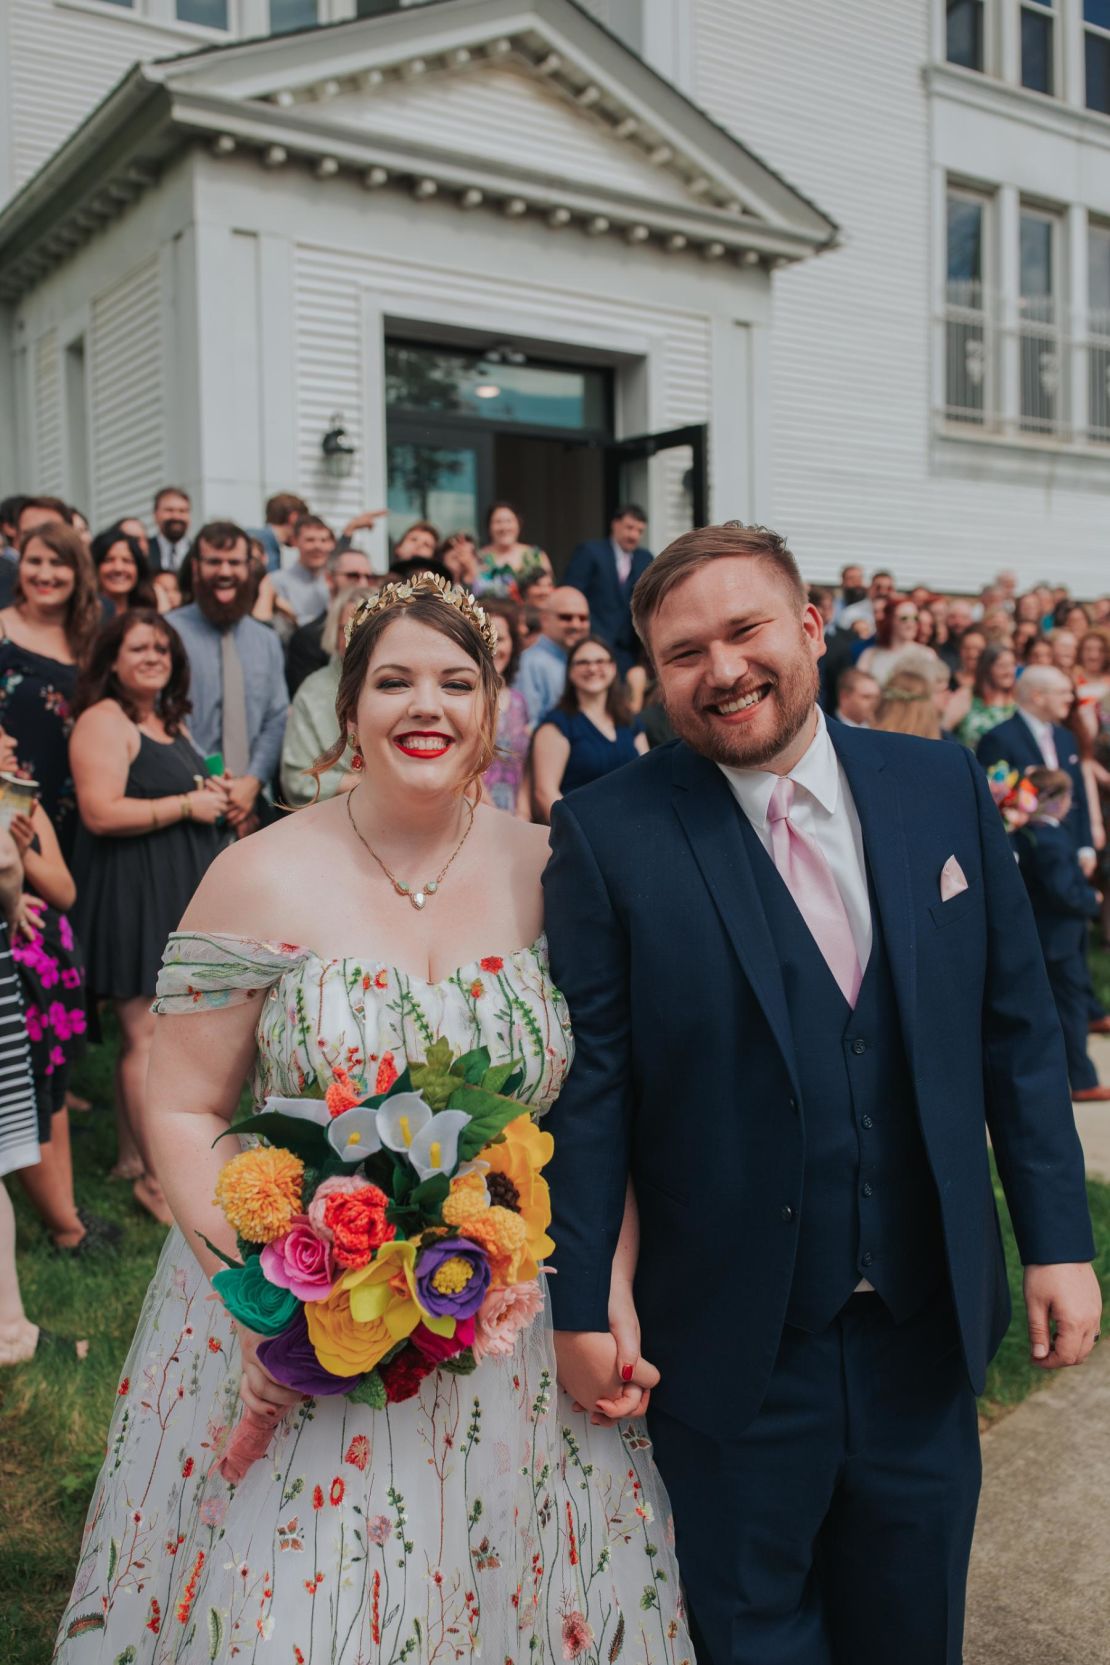 Kyle and Beth Long tried to start a family soon after their wedding in 2018.